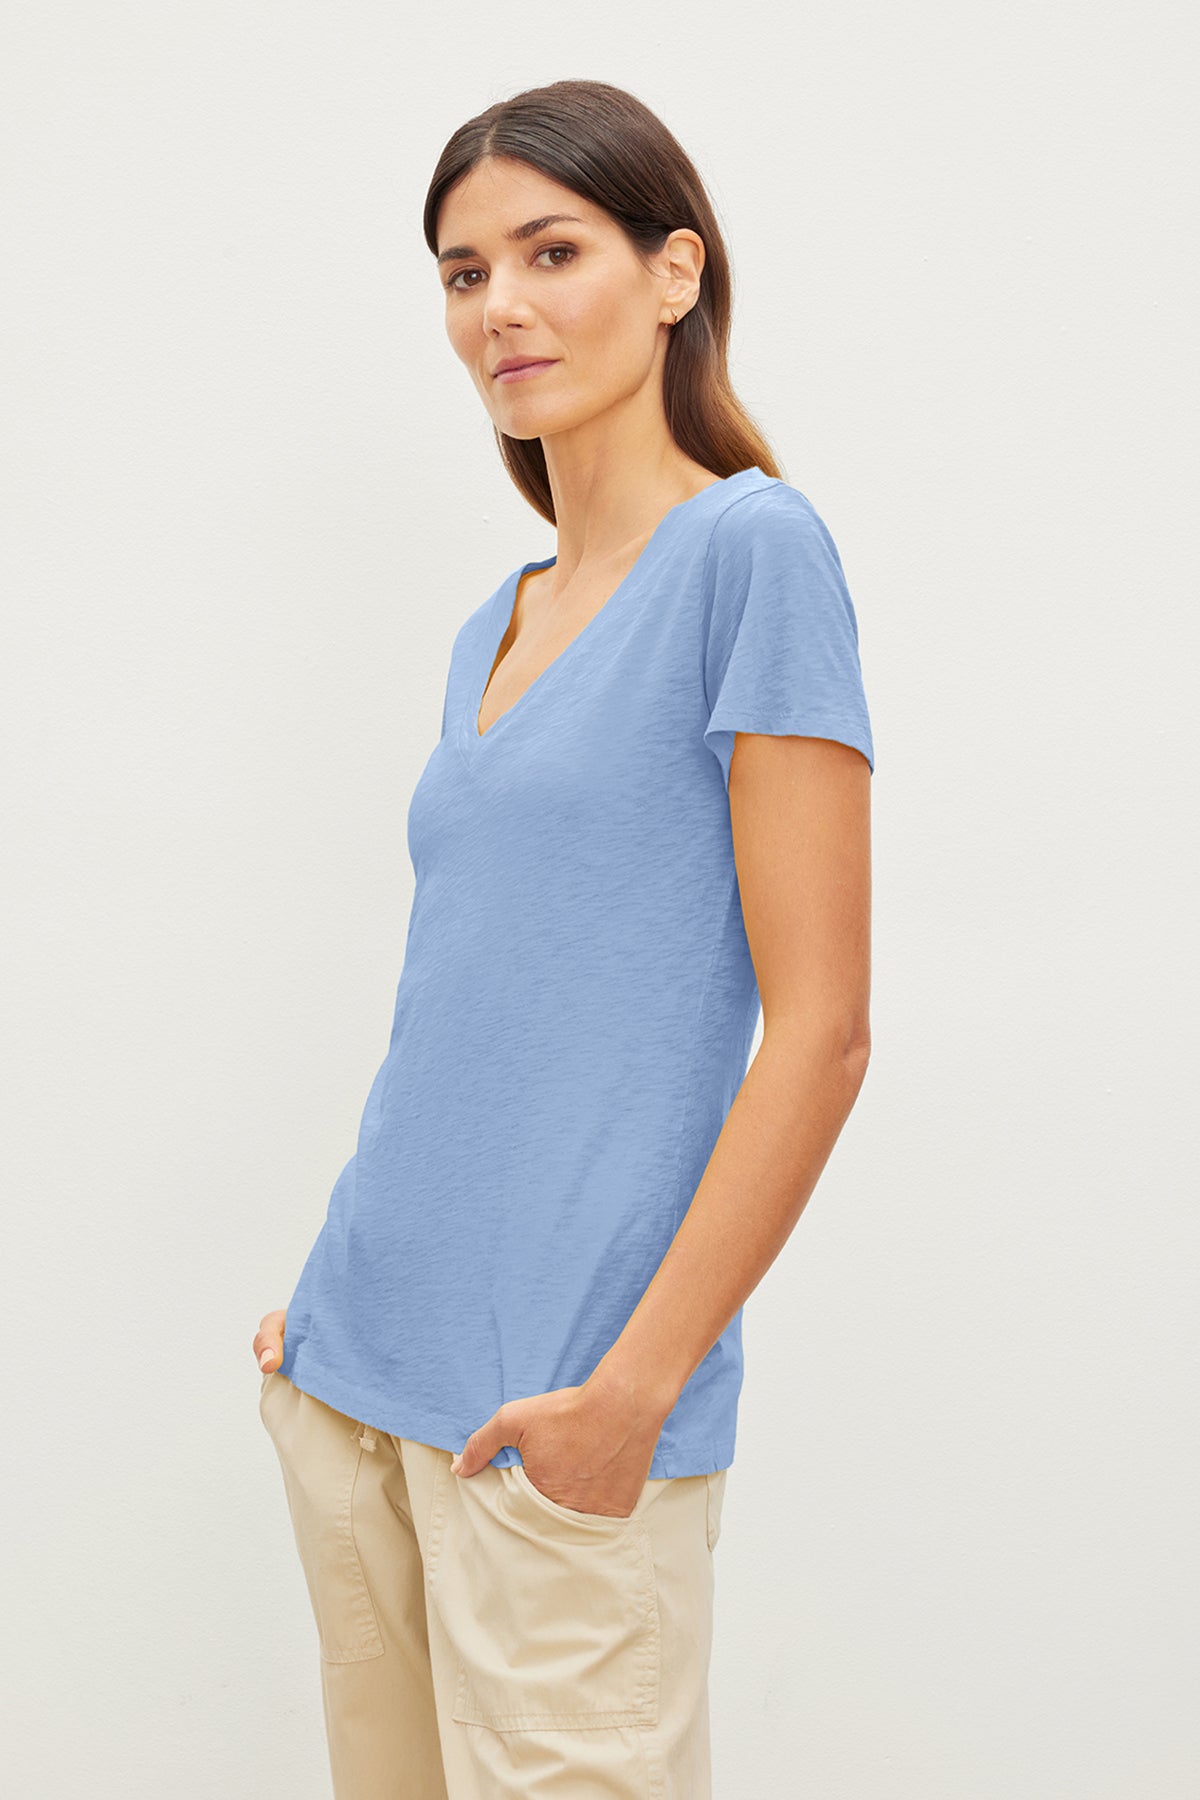 A preppy woman wearing a Velvet by Graham & Spencer LILITH COTTON SLUB V-NECK TEE.-35967728976065